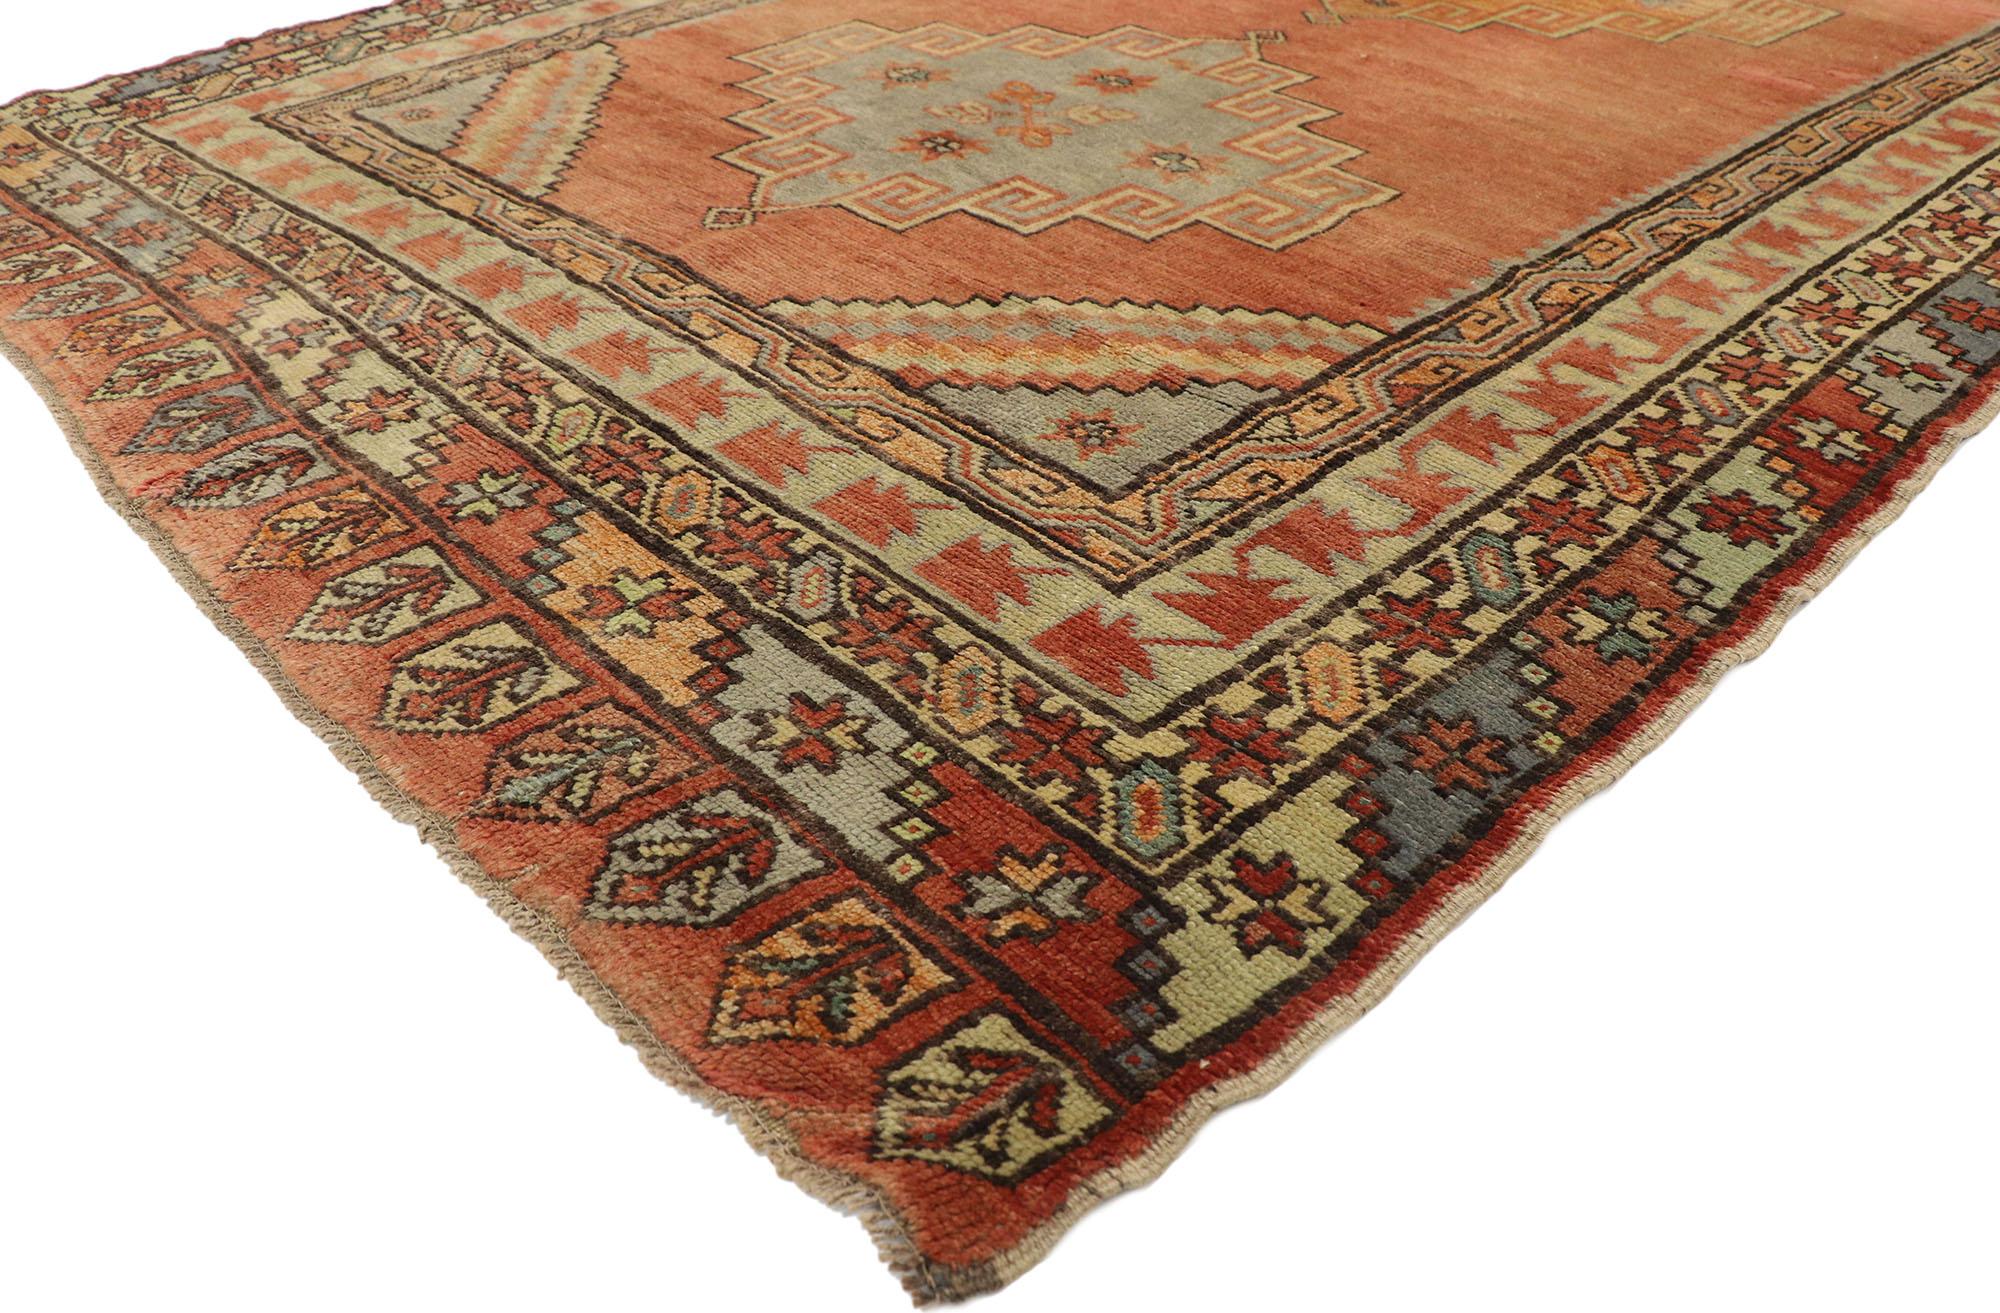 51802, vintage Turkish Oushak gallery rug with Spanish mission style, wide hallway runner. This hand knotted wool vintage Turkish Oushak gallery rug features three large stepped medallions with small diamond pendants floating on an abrashed terra